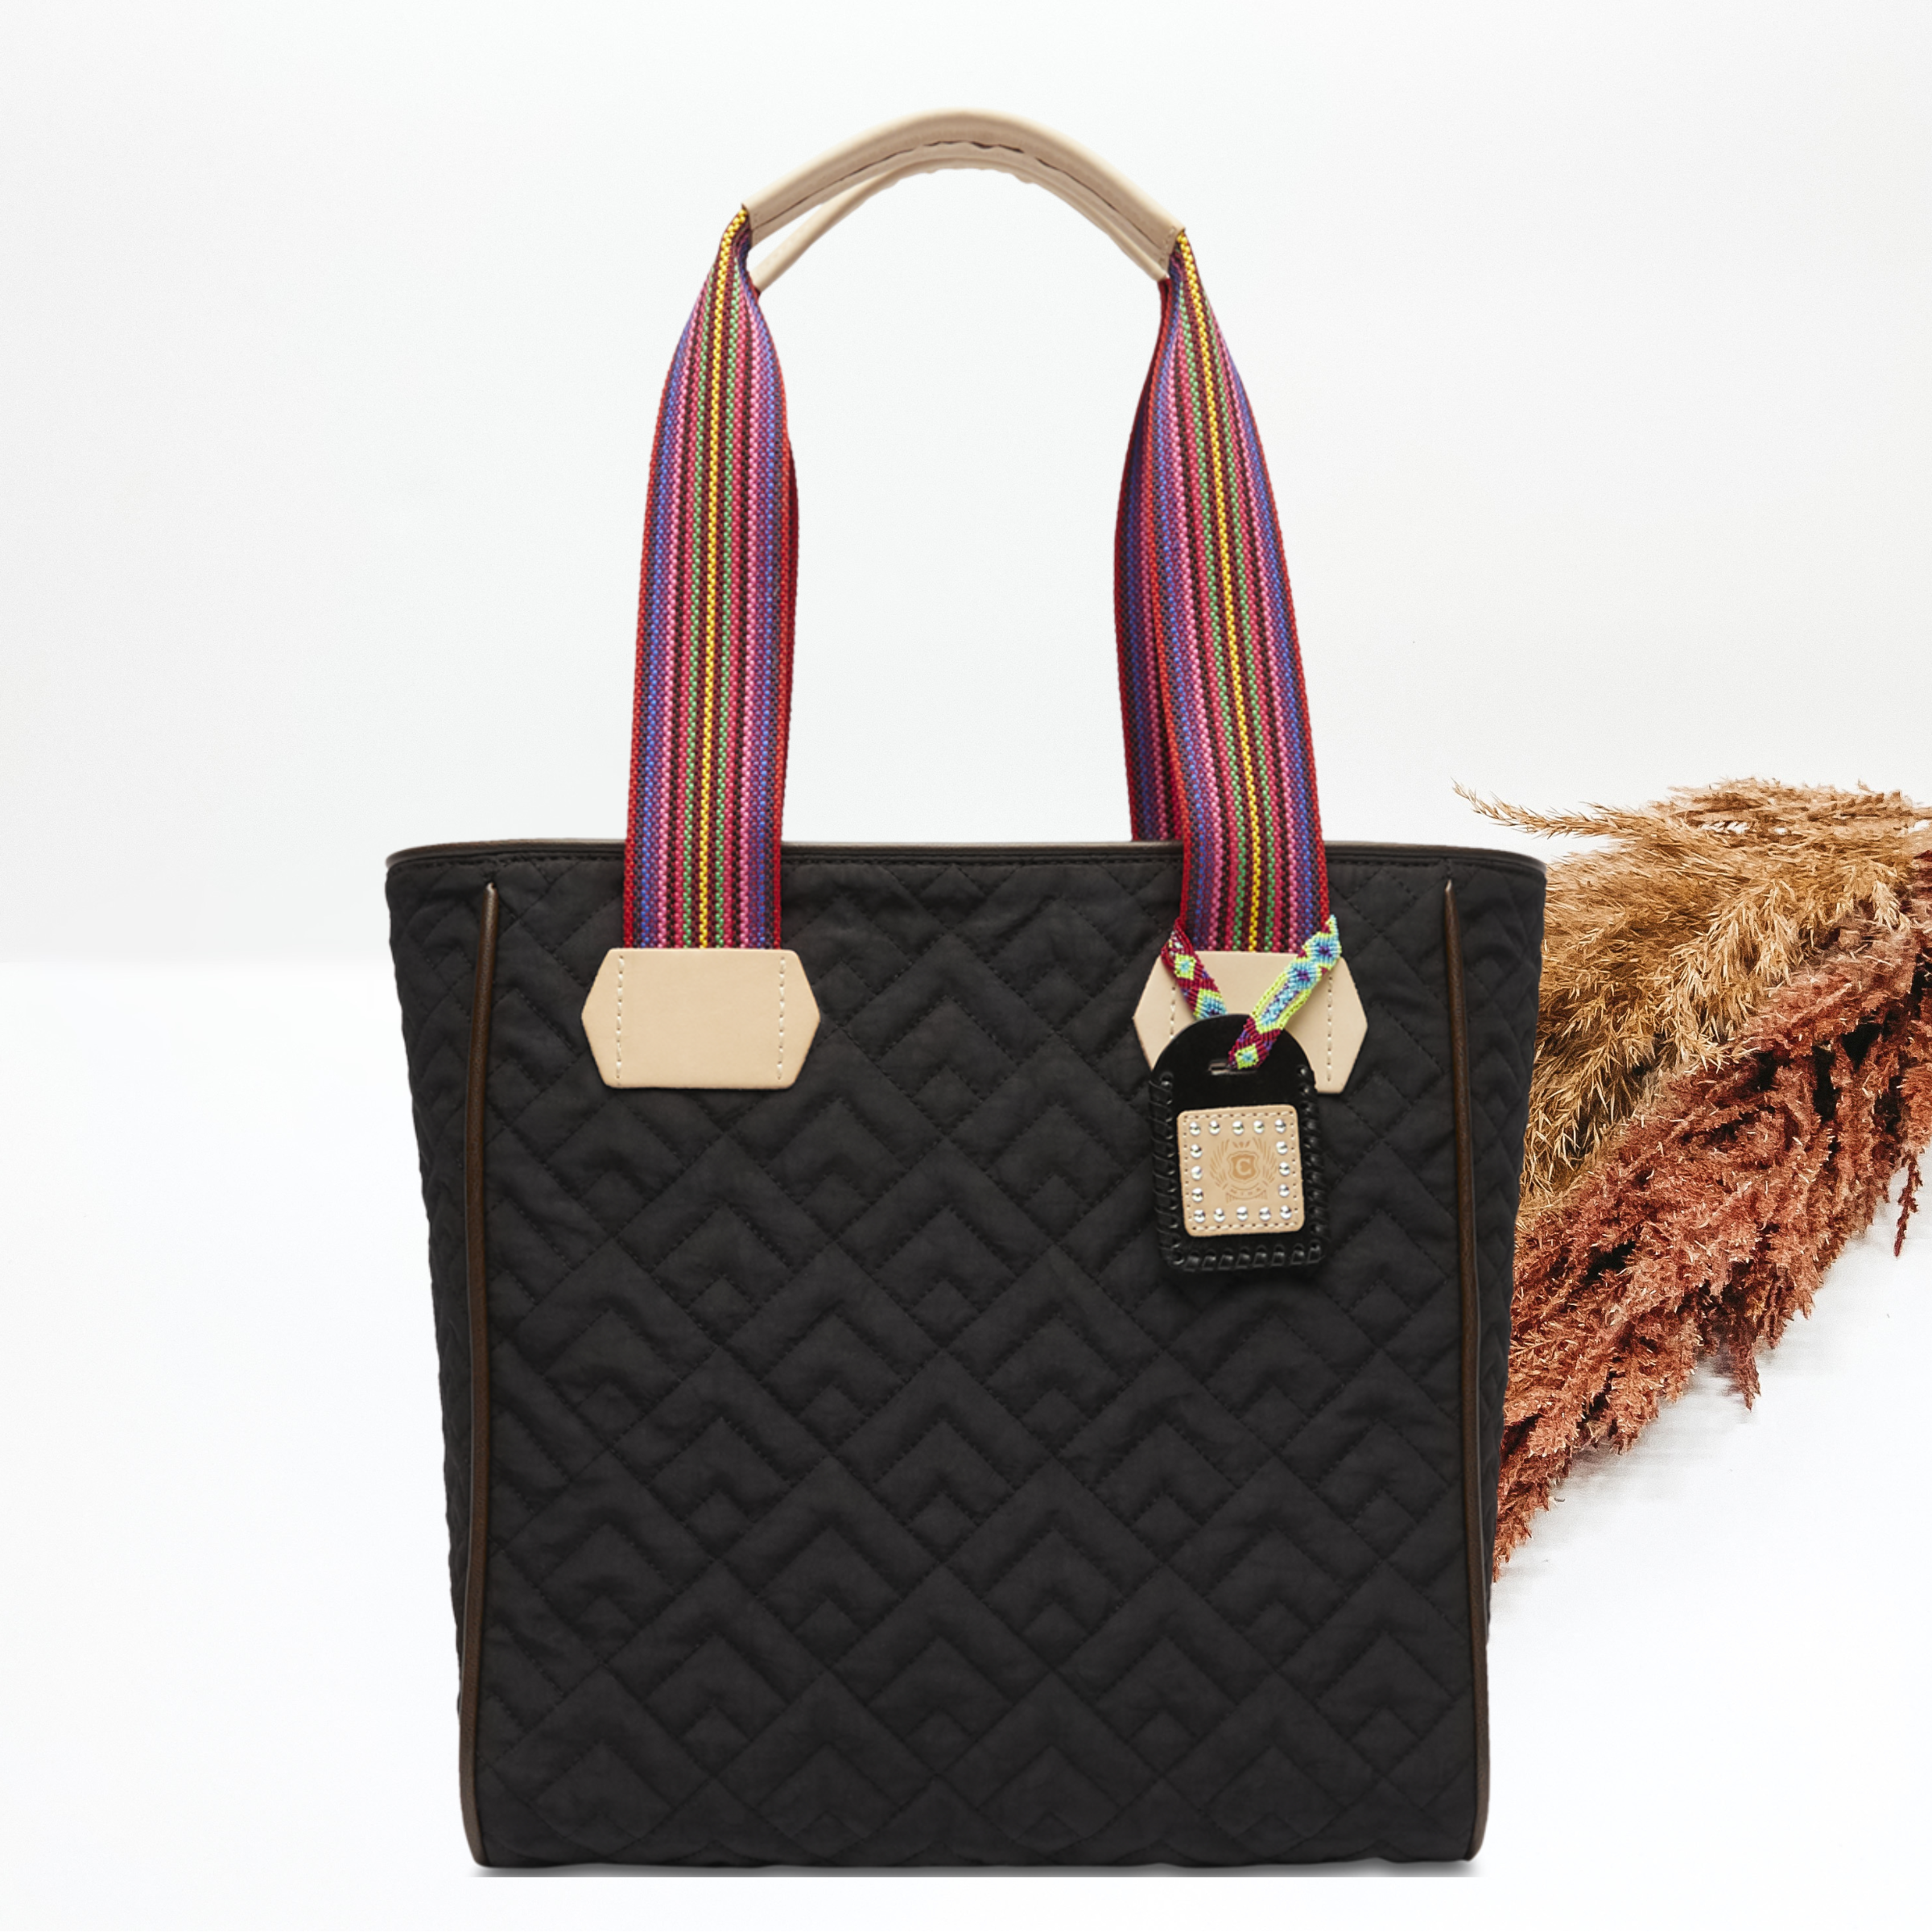 Pictured on a white background is a black classicbag that has a diamond stitched print. This purse includes a black and tan charm and striped straps with leather handle holds. 